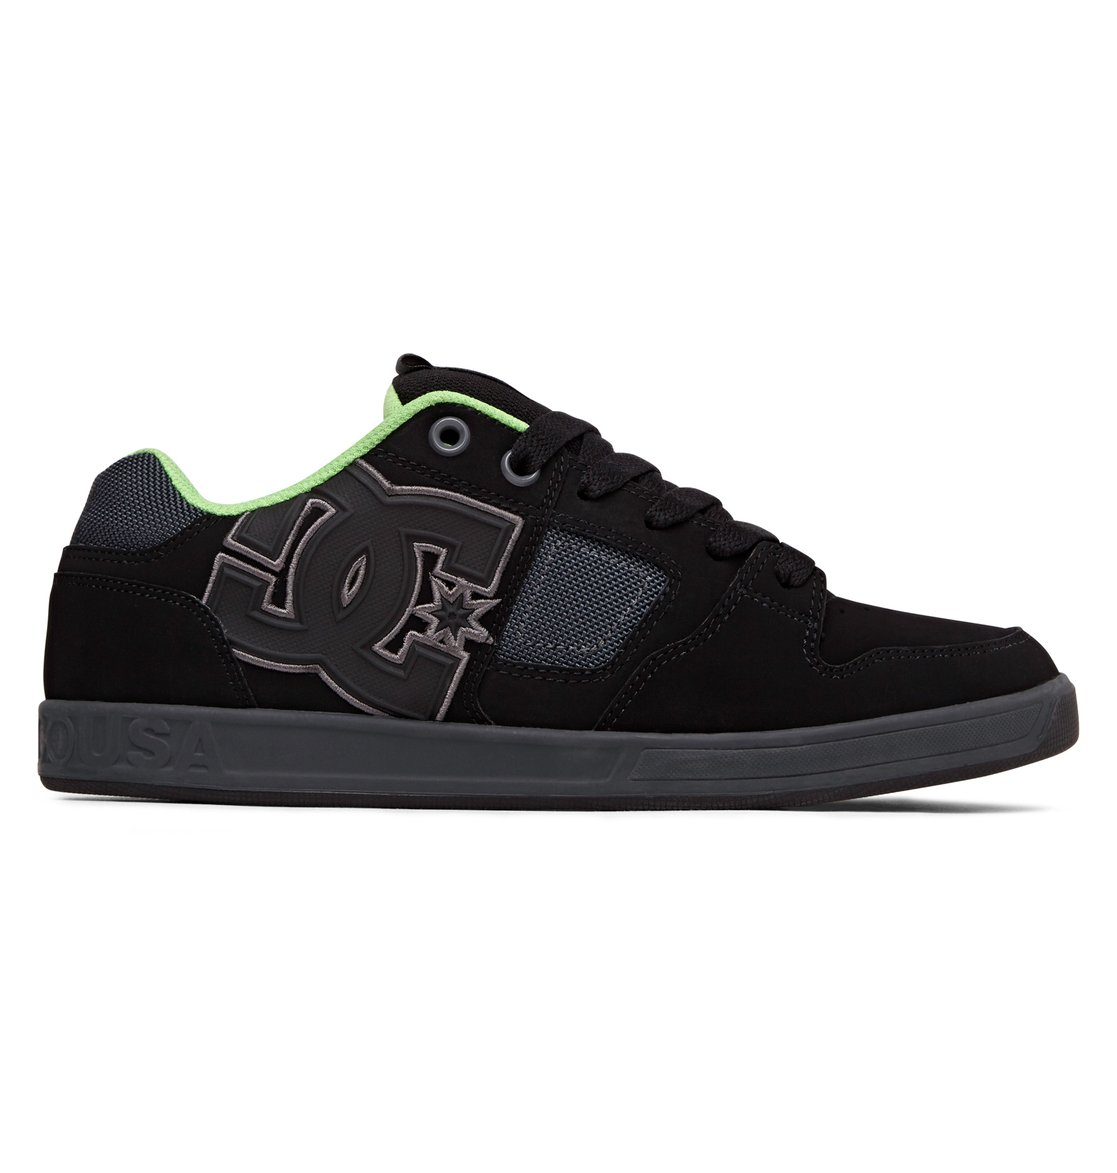 Men's Sceptor RV Shoes ADYS100180 | DC Shoes